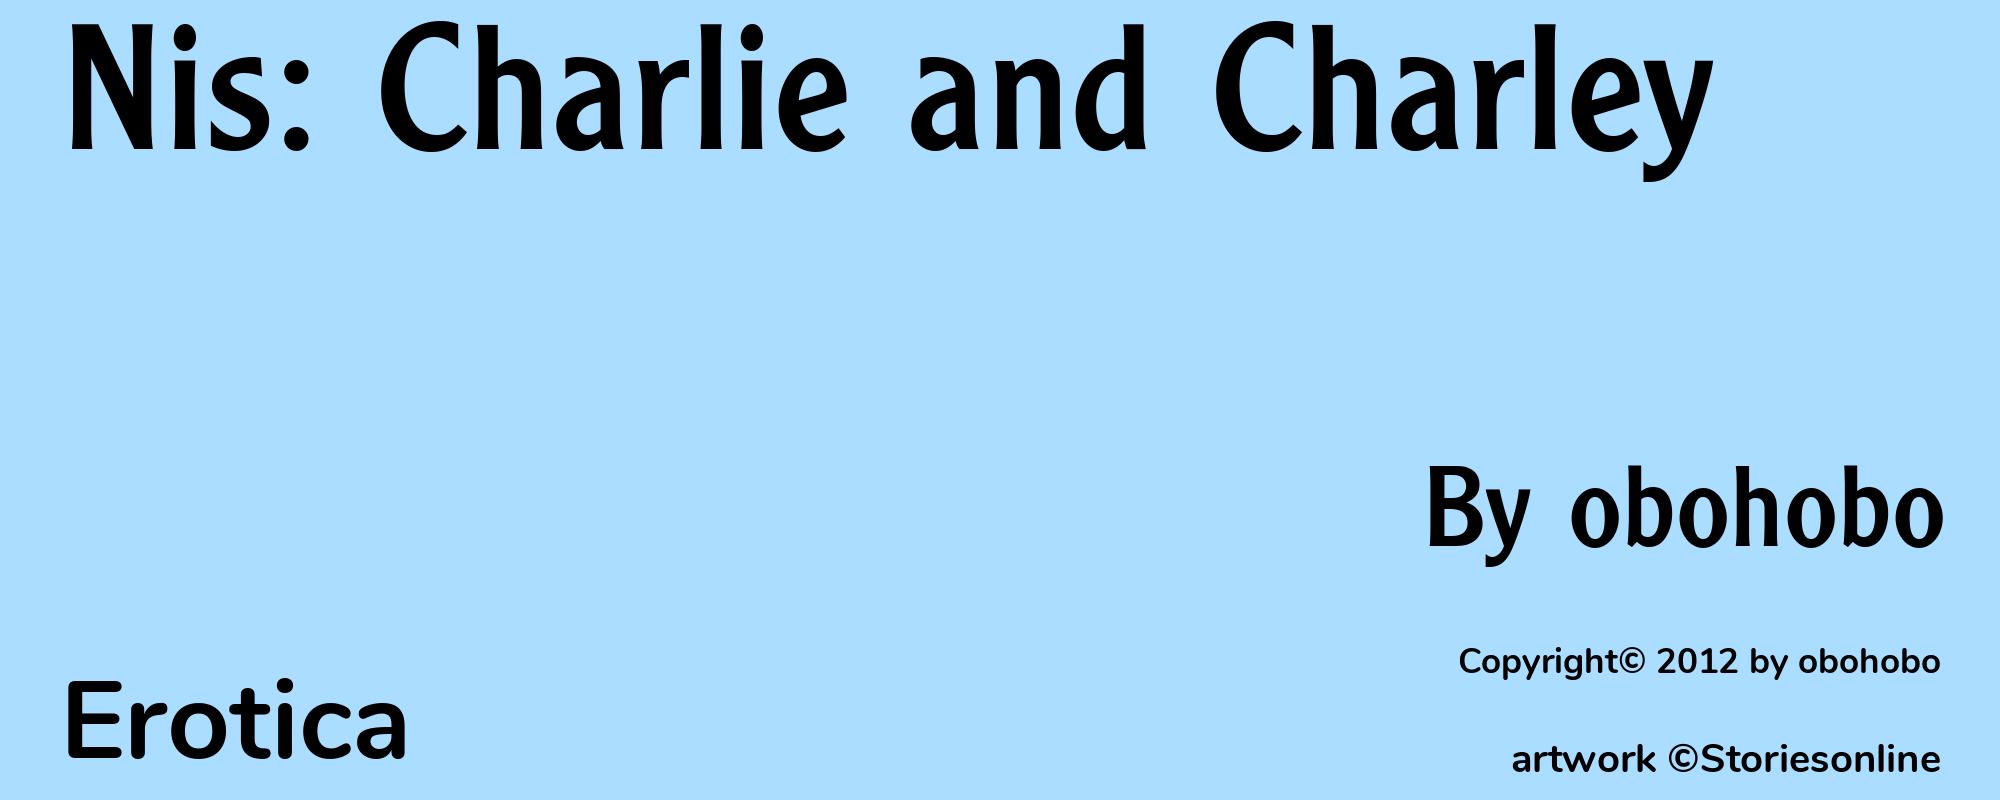 Nis: Charlie and Charley - Cover